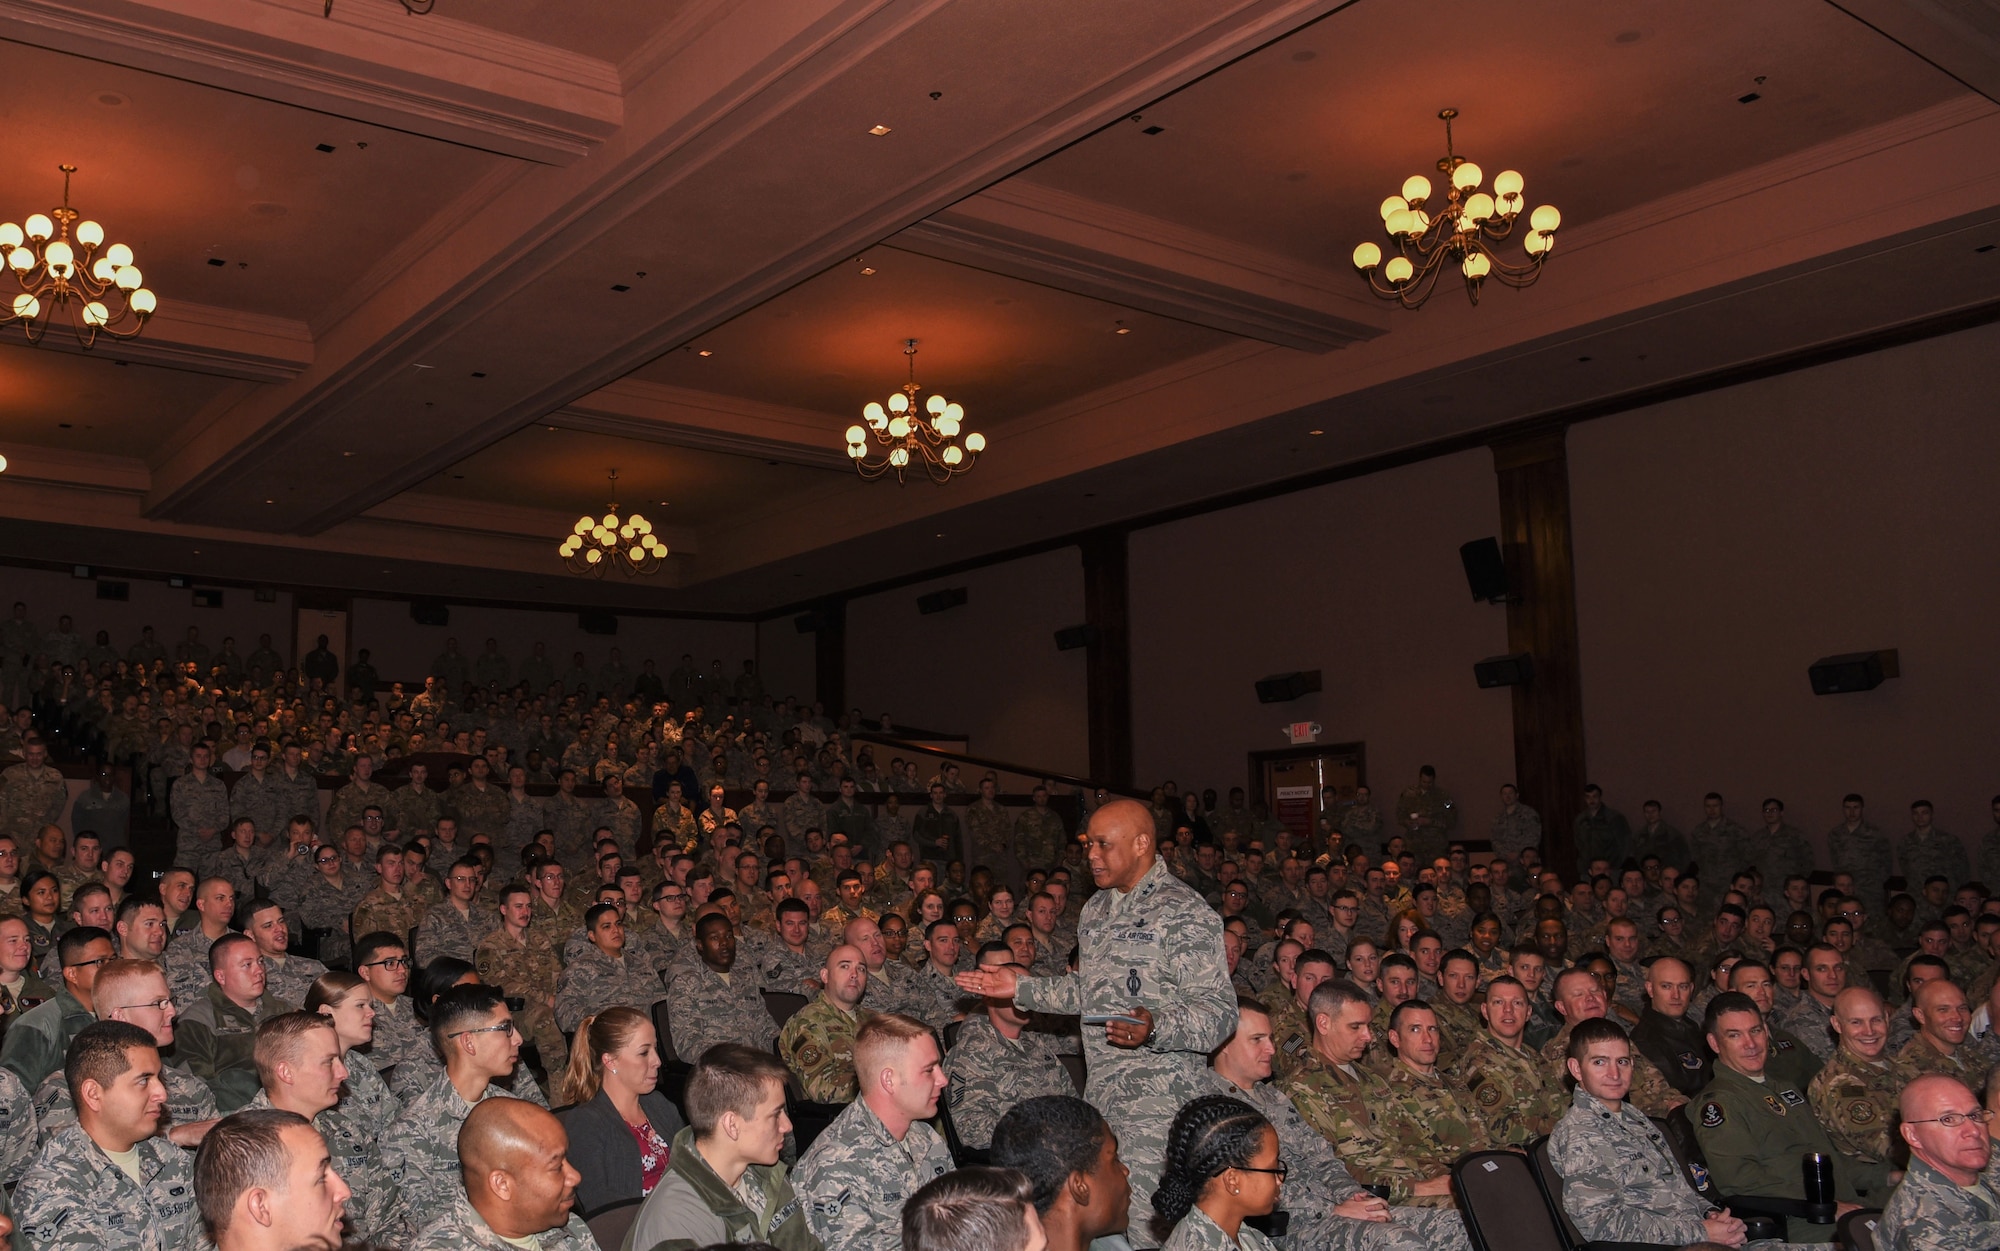 Maj. Gen. Anthony Cotton, 20th Air Force commander, speaks to Airmen during the commander’s all-call for the 90th Missile Wing at F.E. Warren Air Force Base, Wyo., Nov. 29, 2017. Cotton will take the importance of the nuclear enterprise with him to his next assignment and do his part to educate others on that importance. (U.S. Air Force photo by Airman 1st Class Braydon Williams)